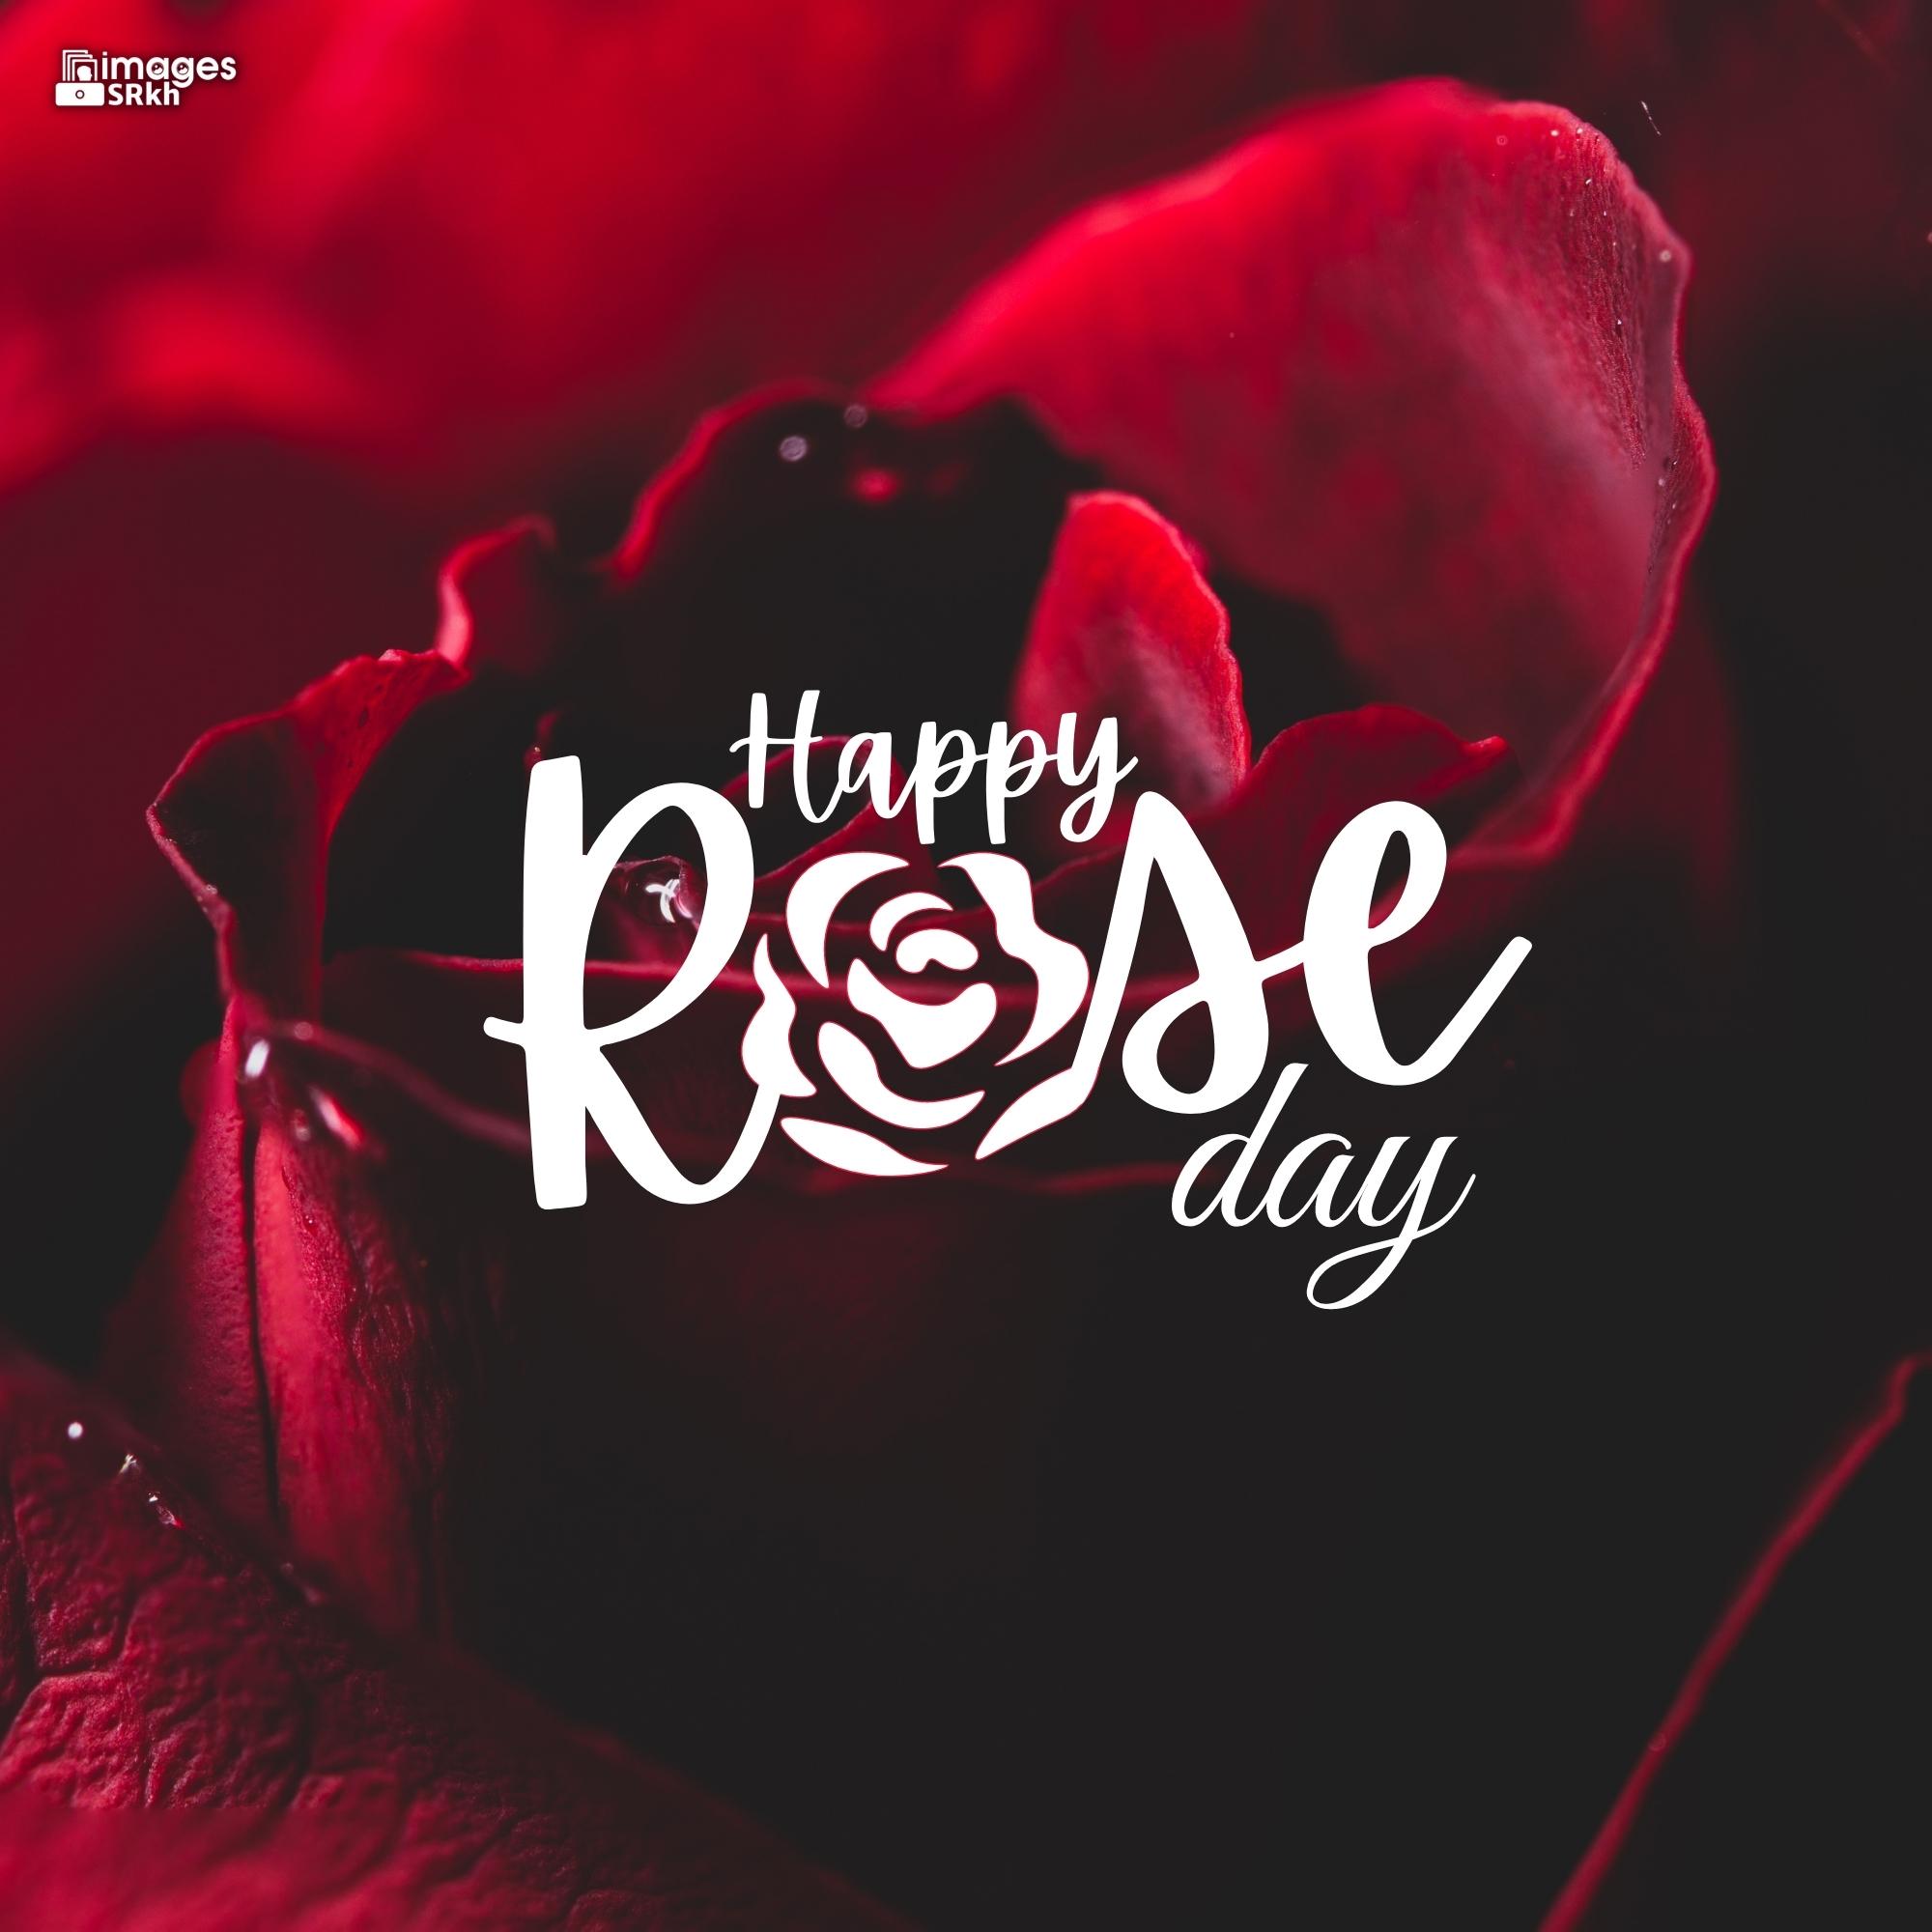 Happy Rose Day Image Hd Download (38)